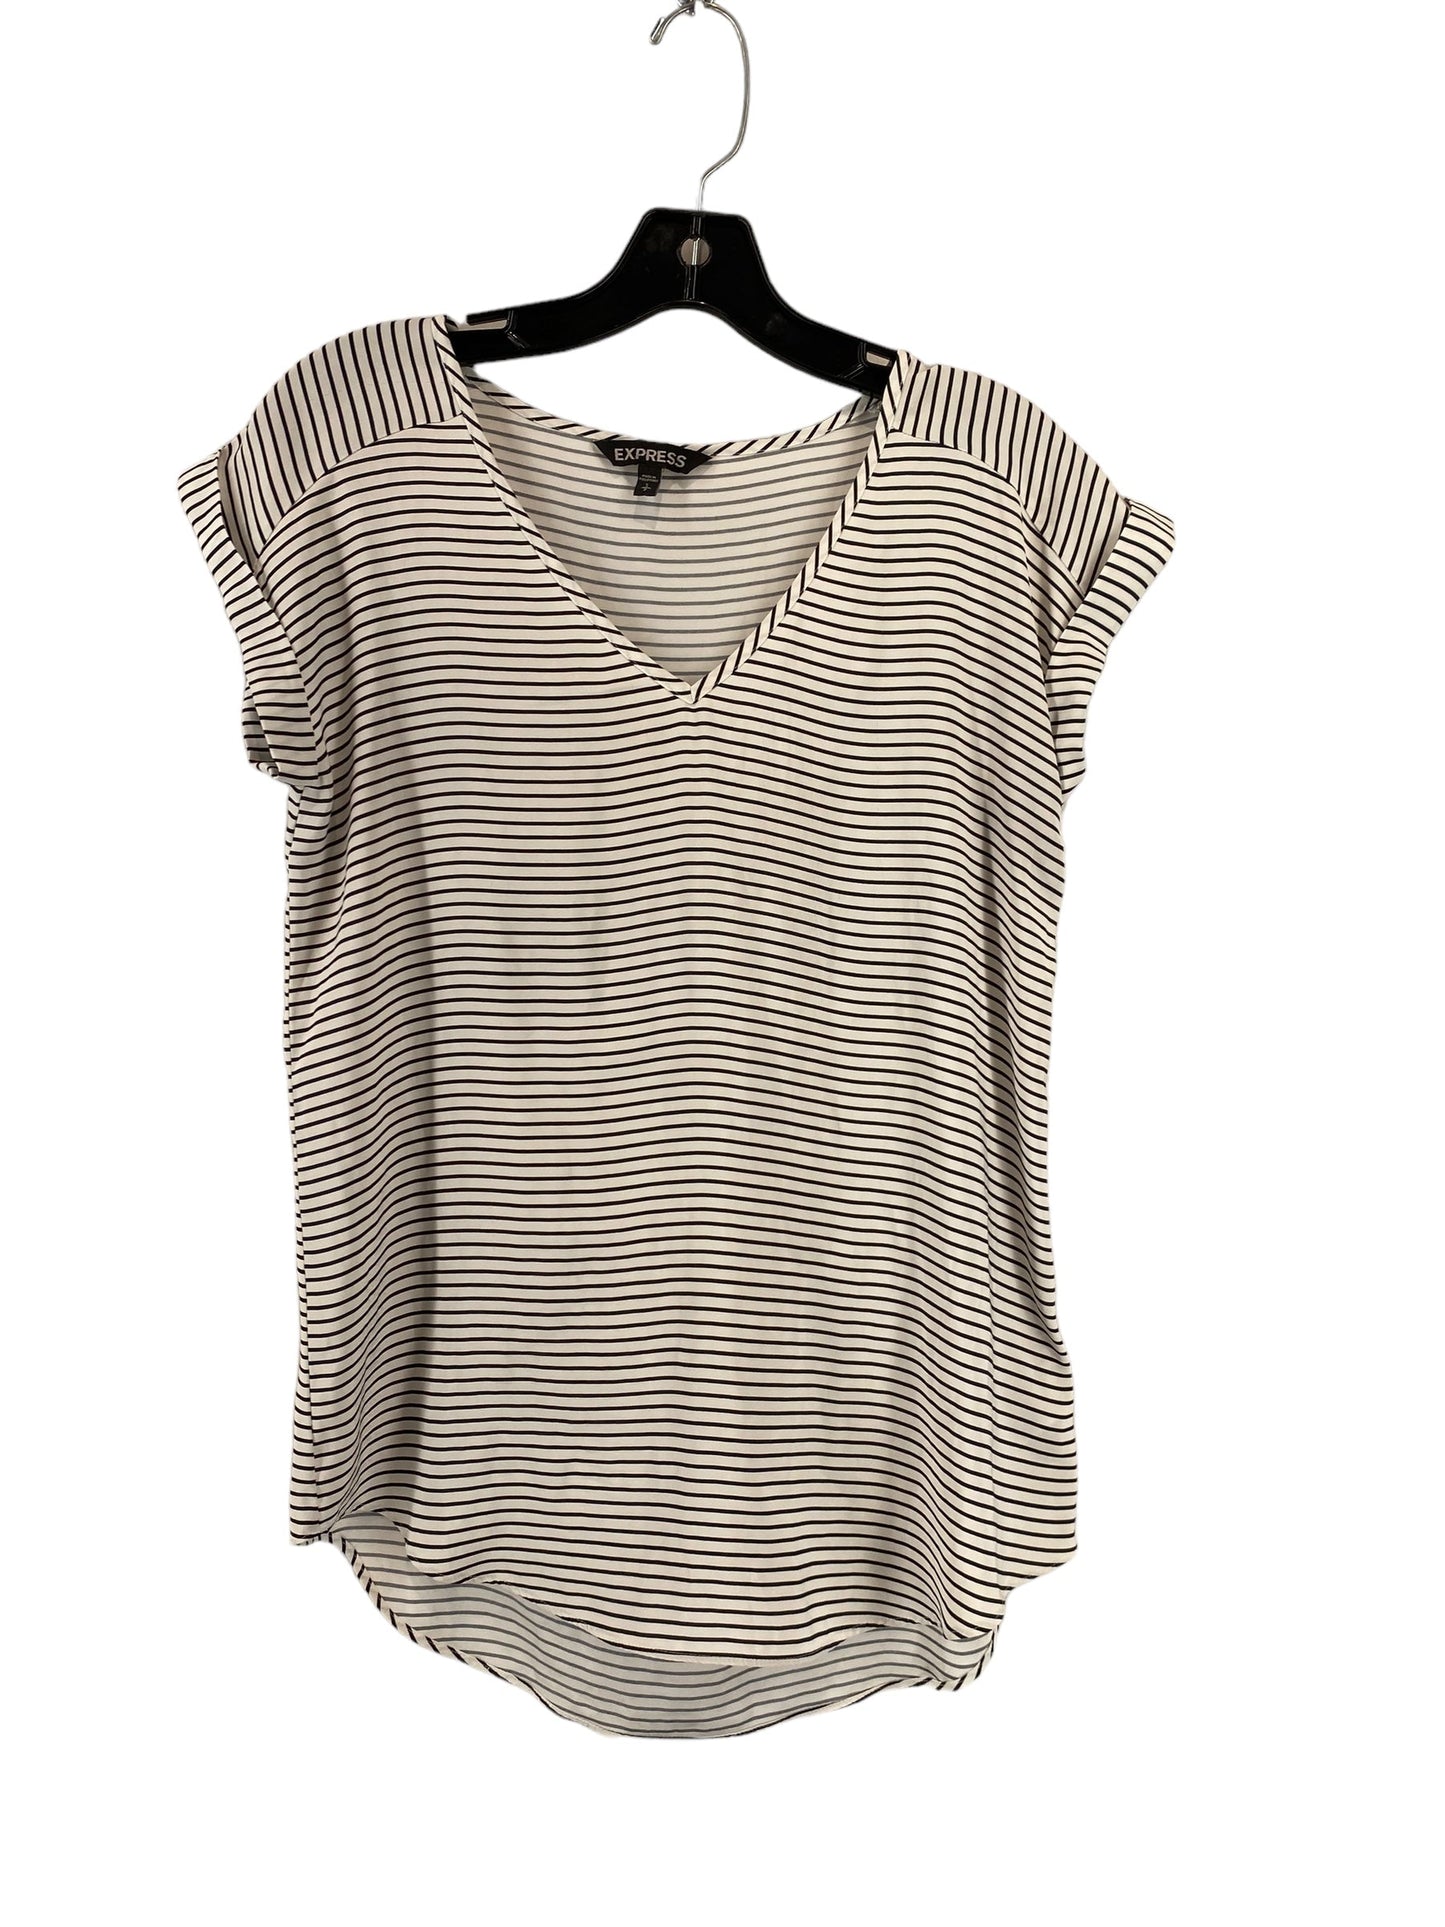 Black & White Top Short Sleeve Express, Size S